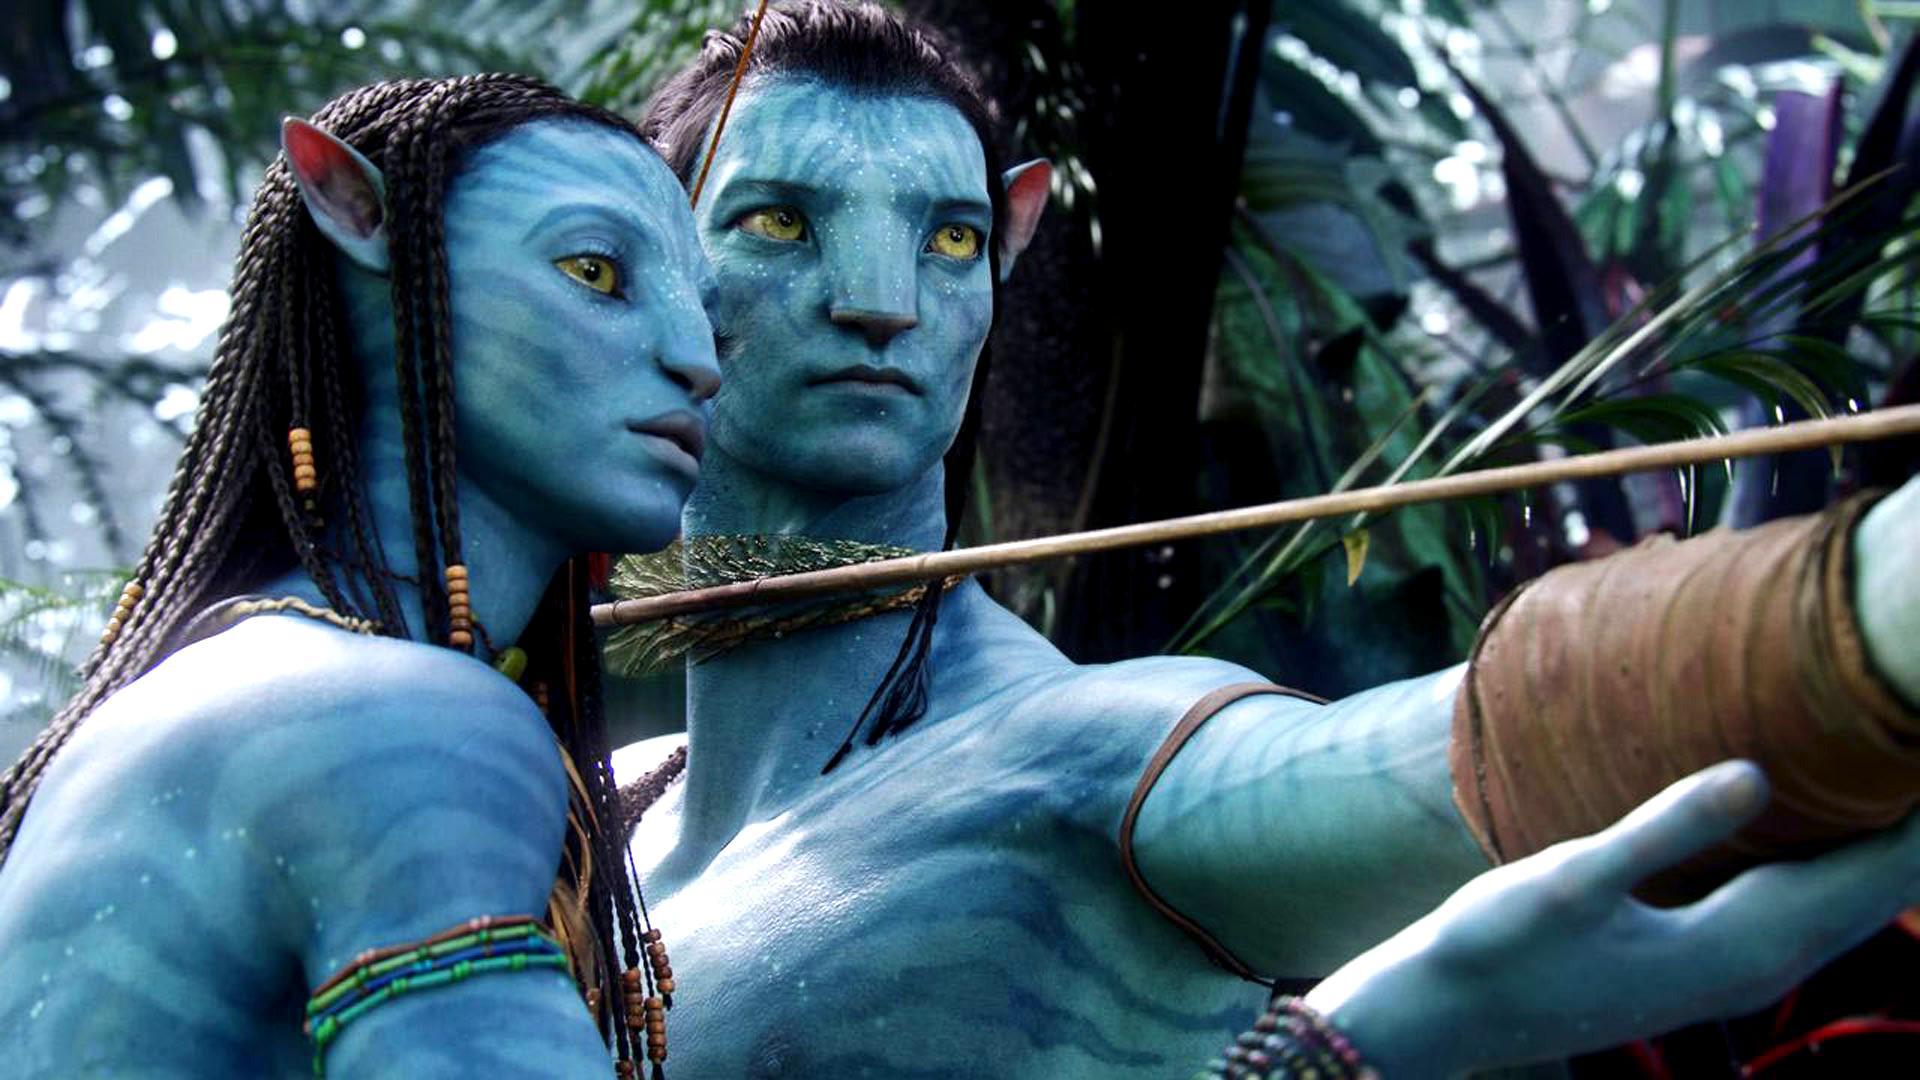 Avatar can only be seen in 3D, 2D is forbidden